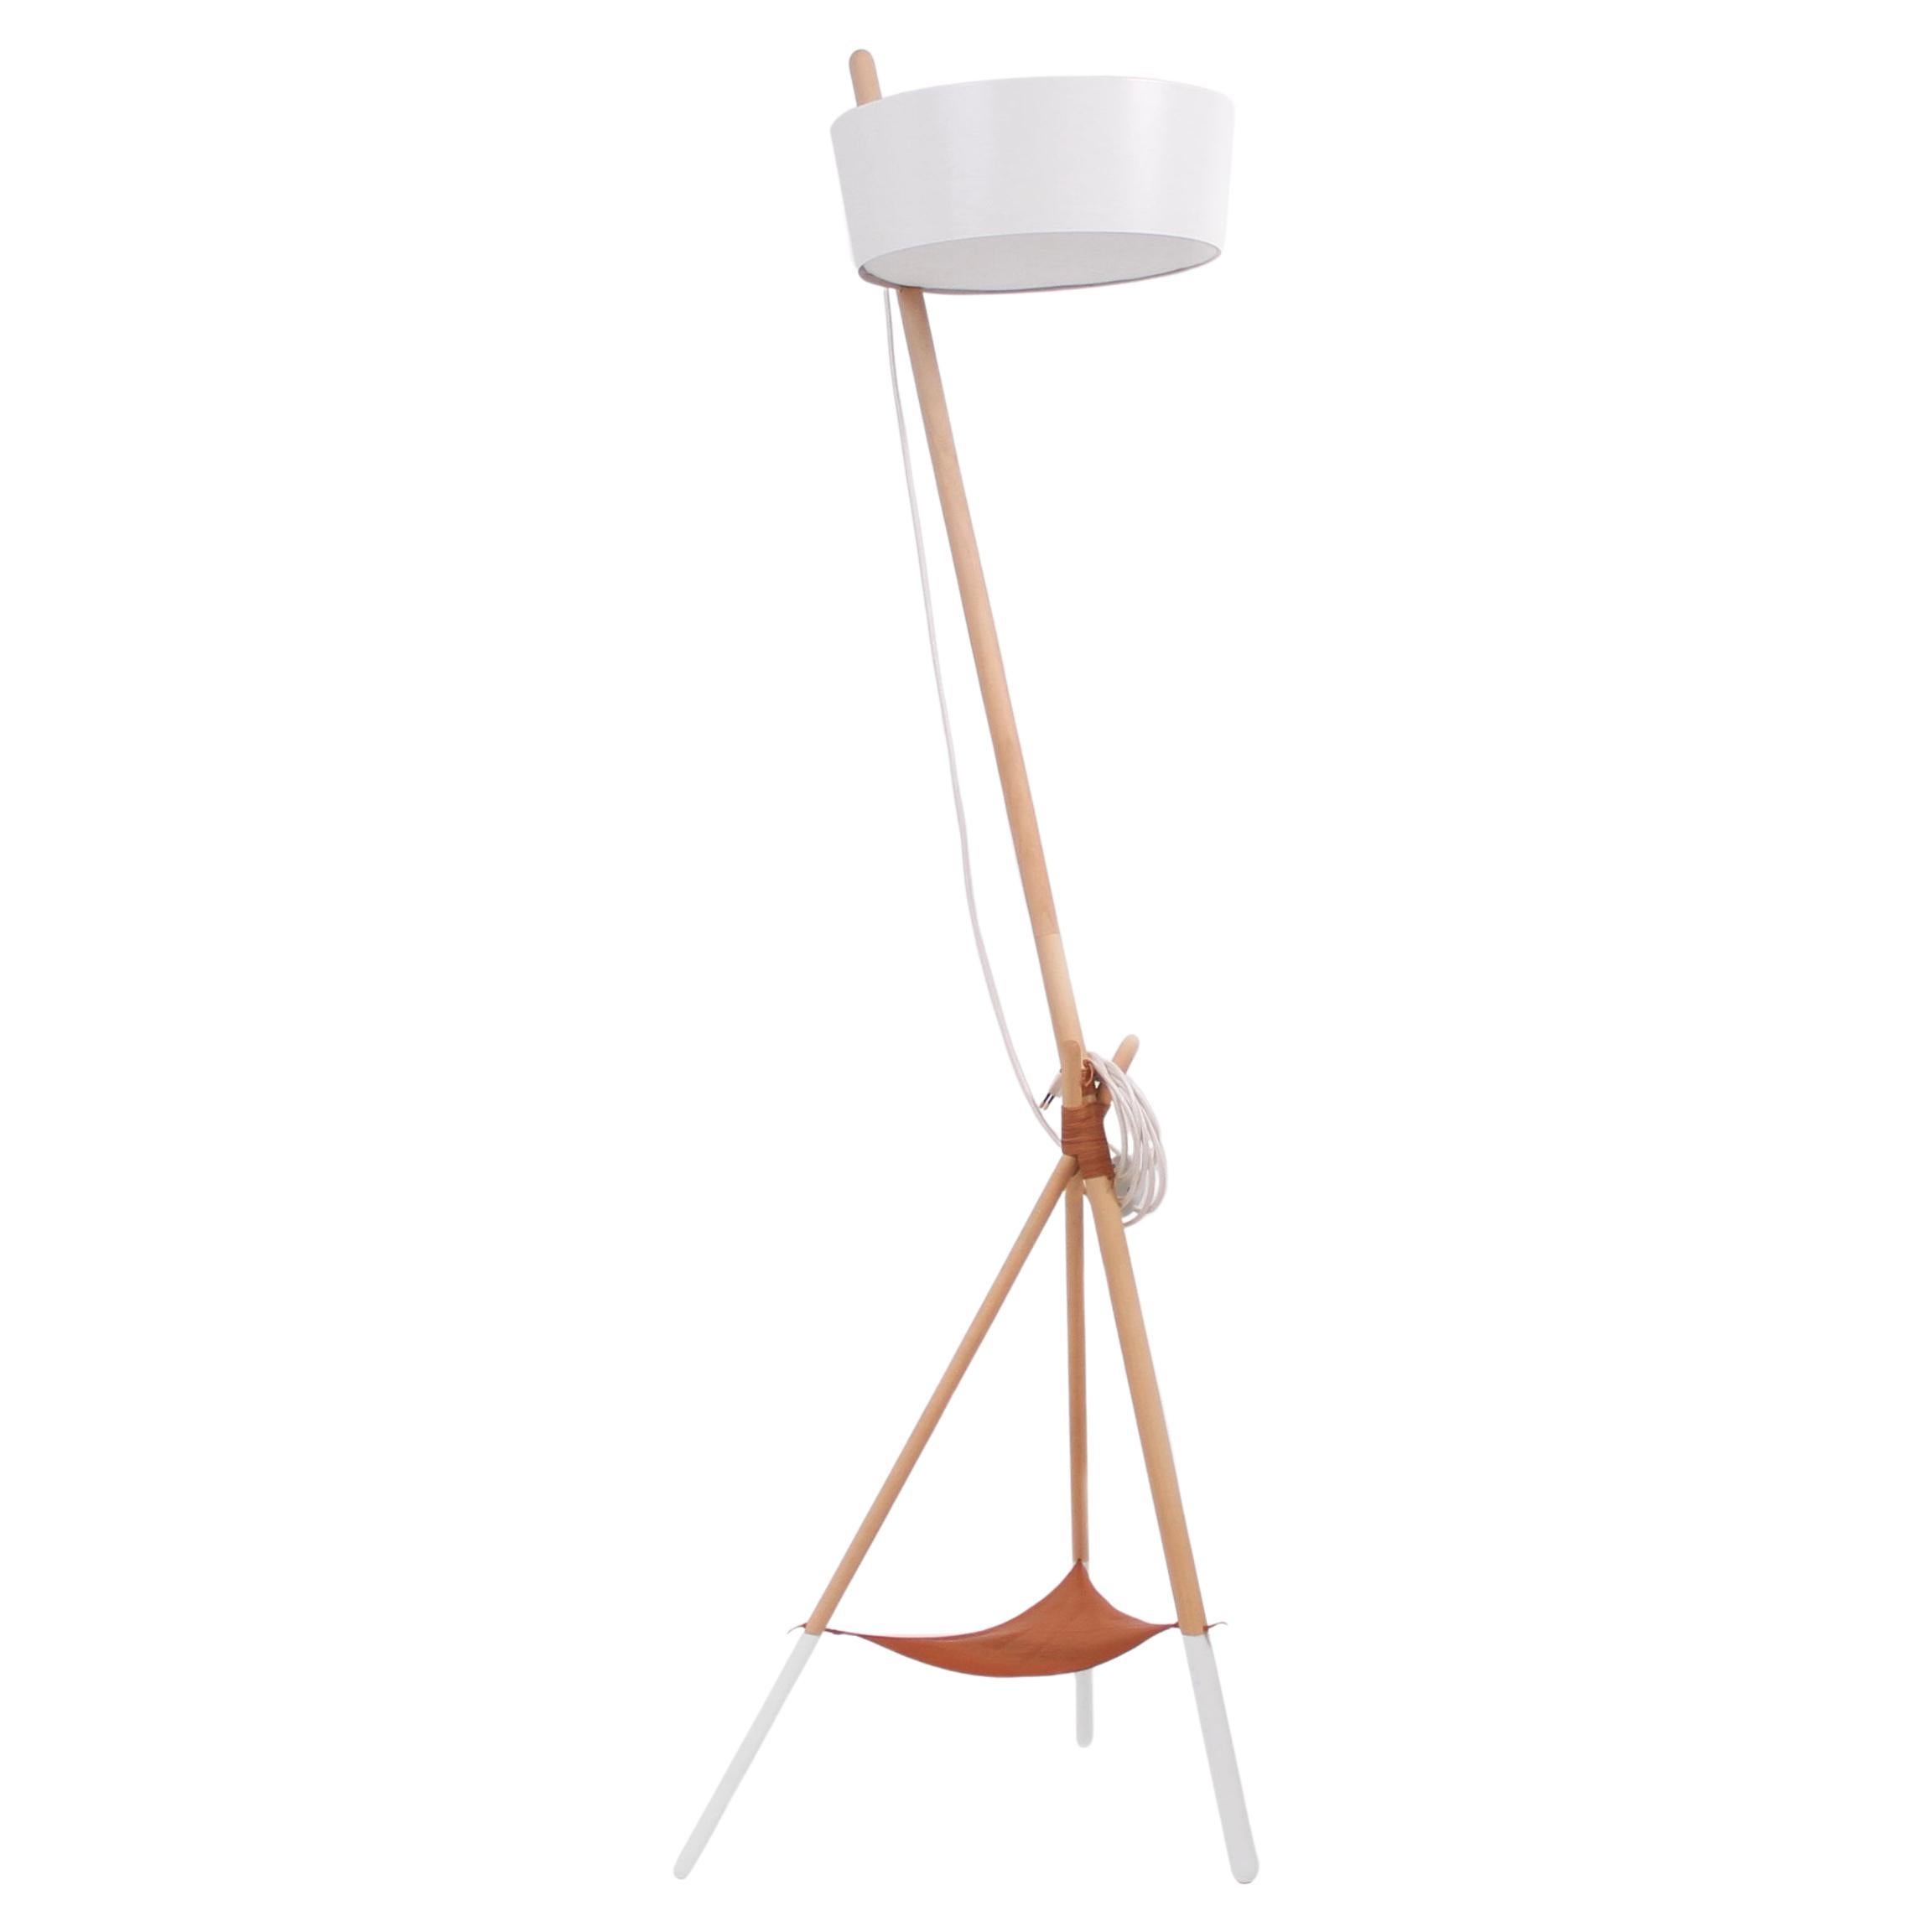 Ka XL ambient floor lamp with tray · White & beech